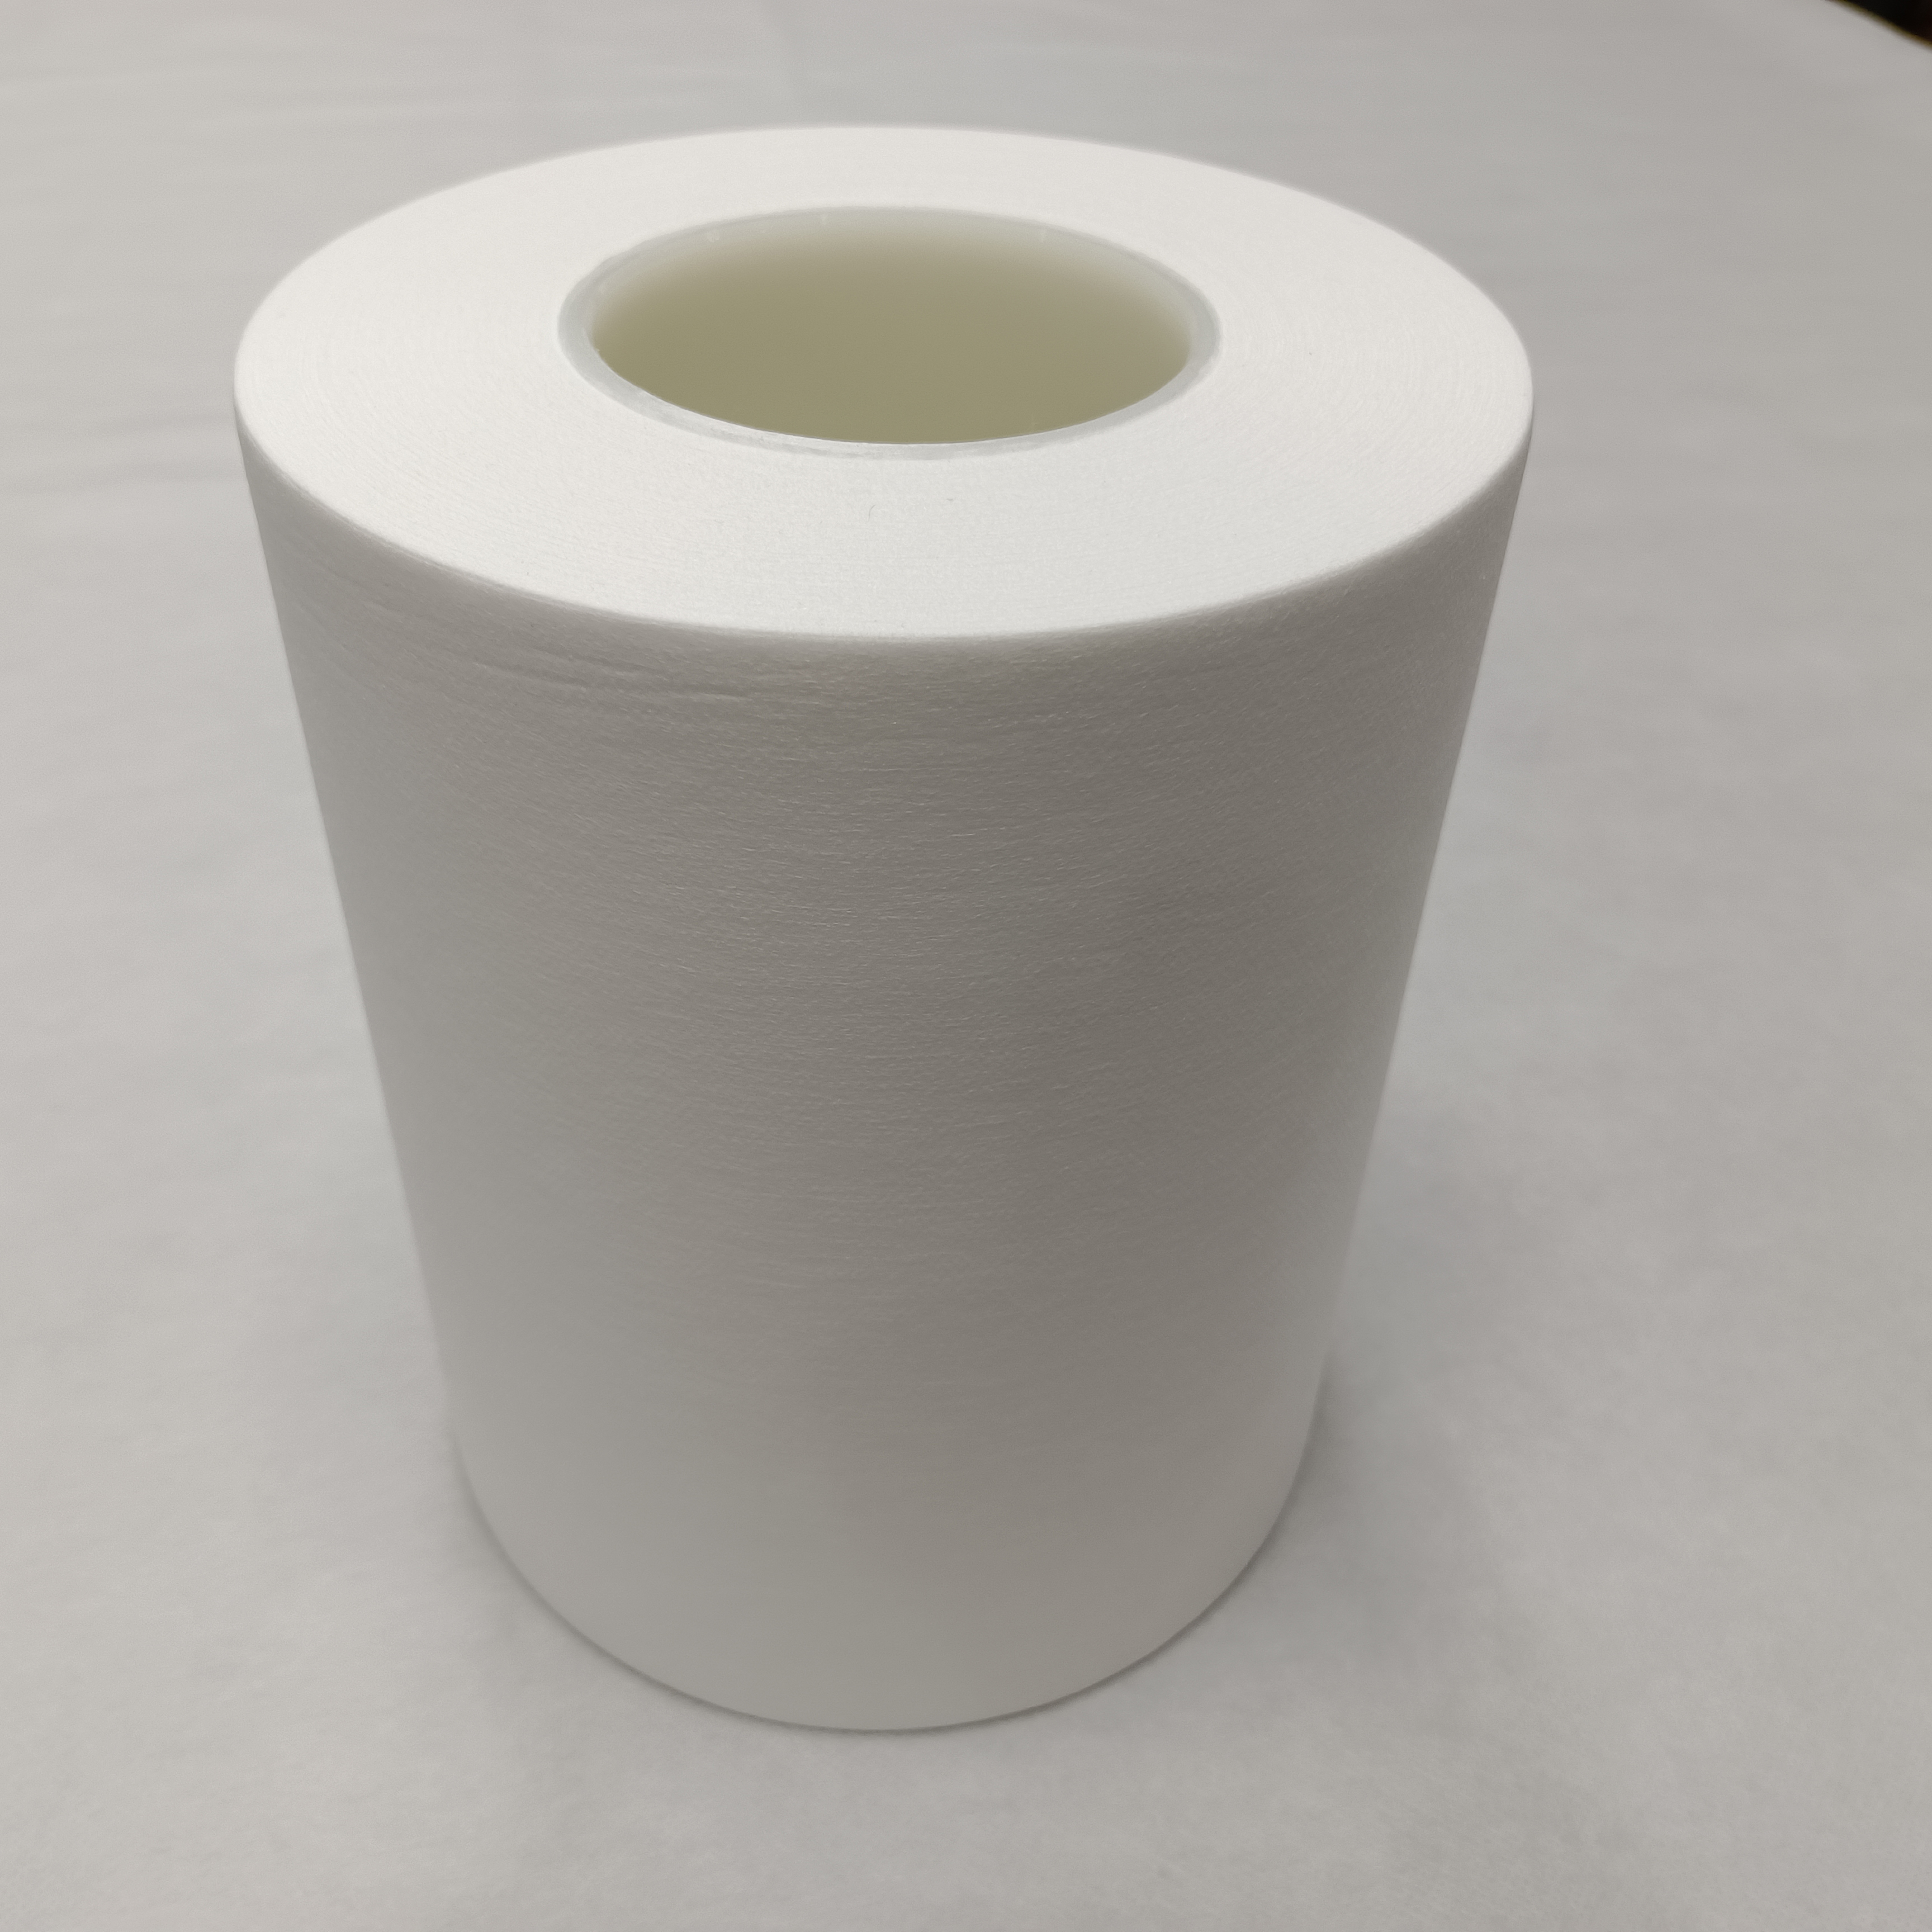 2022 Latest Design Laminated Plastic Film - ES Nonwoven Laminated PE Film High Strength for Surface of Sanitary Napkins and diapers – Huabao